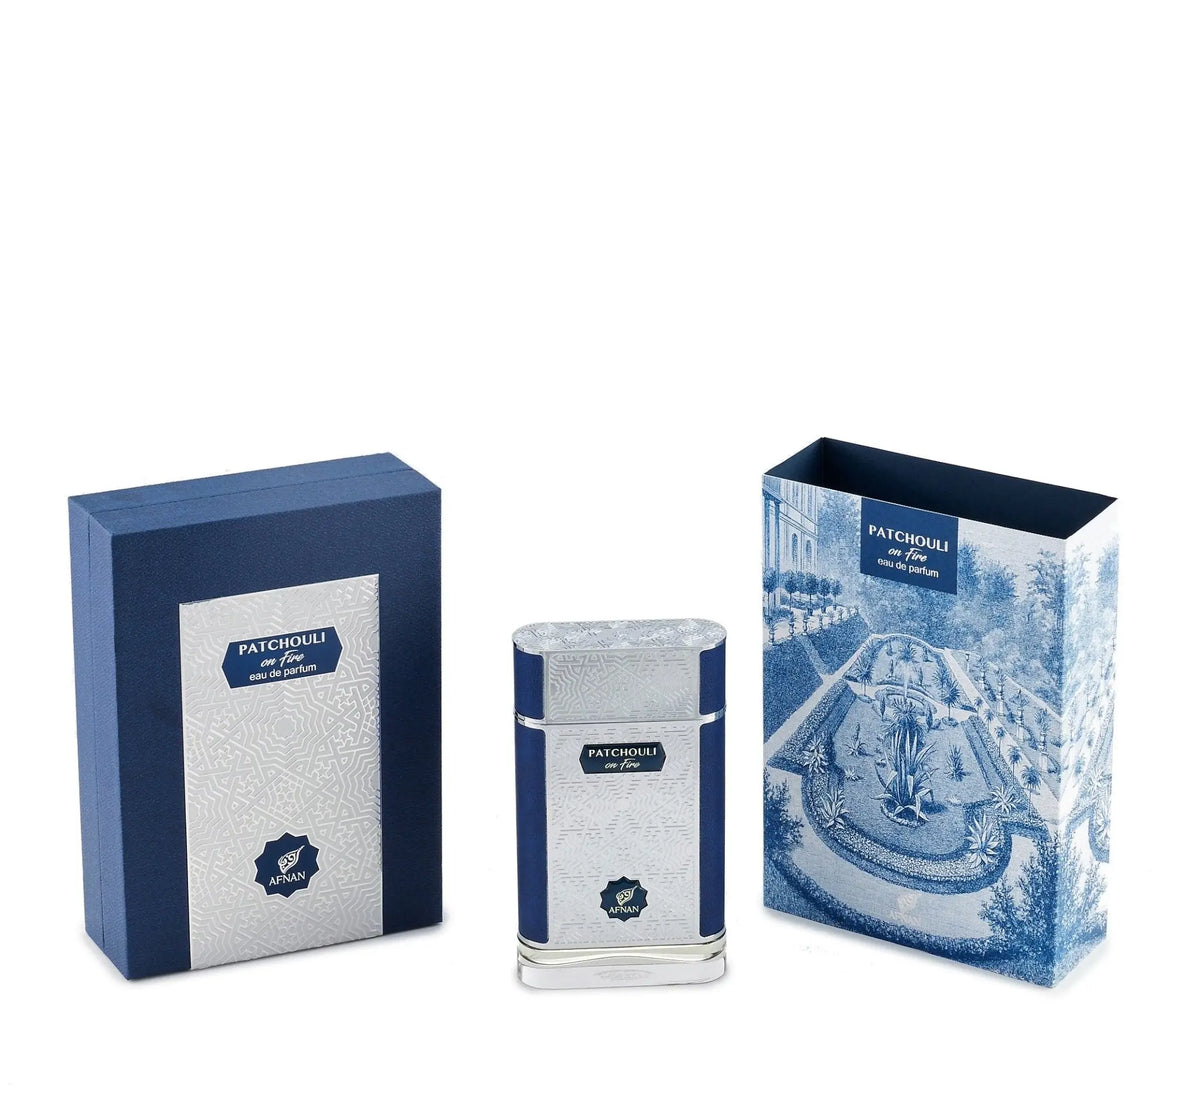 The image showcases a set of perfume products with their packaging. There are two boxes and one perfume bottle, all with a consistent color theme of navy blue and white. The box on the left is navy blue with a textured pattern and a white label that reads "PATCHOULI eau de parfum" along with the "AFNAN" logo.  To the right is another box with a detailed blue and white illustration of a classical garden scene, including a fountain and neatly trimmed hedges.